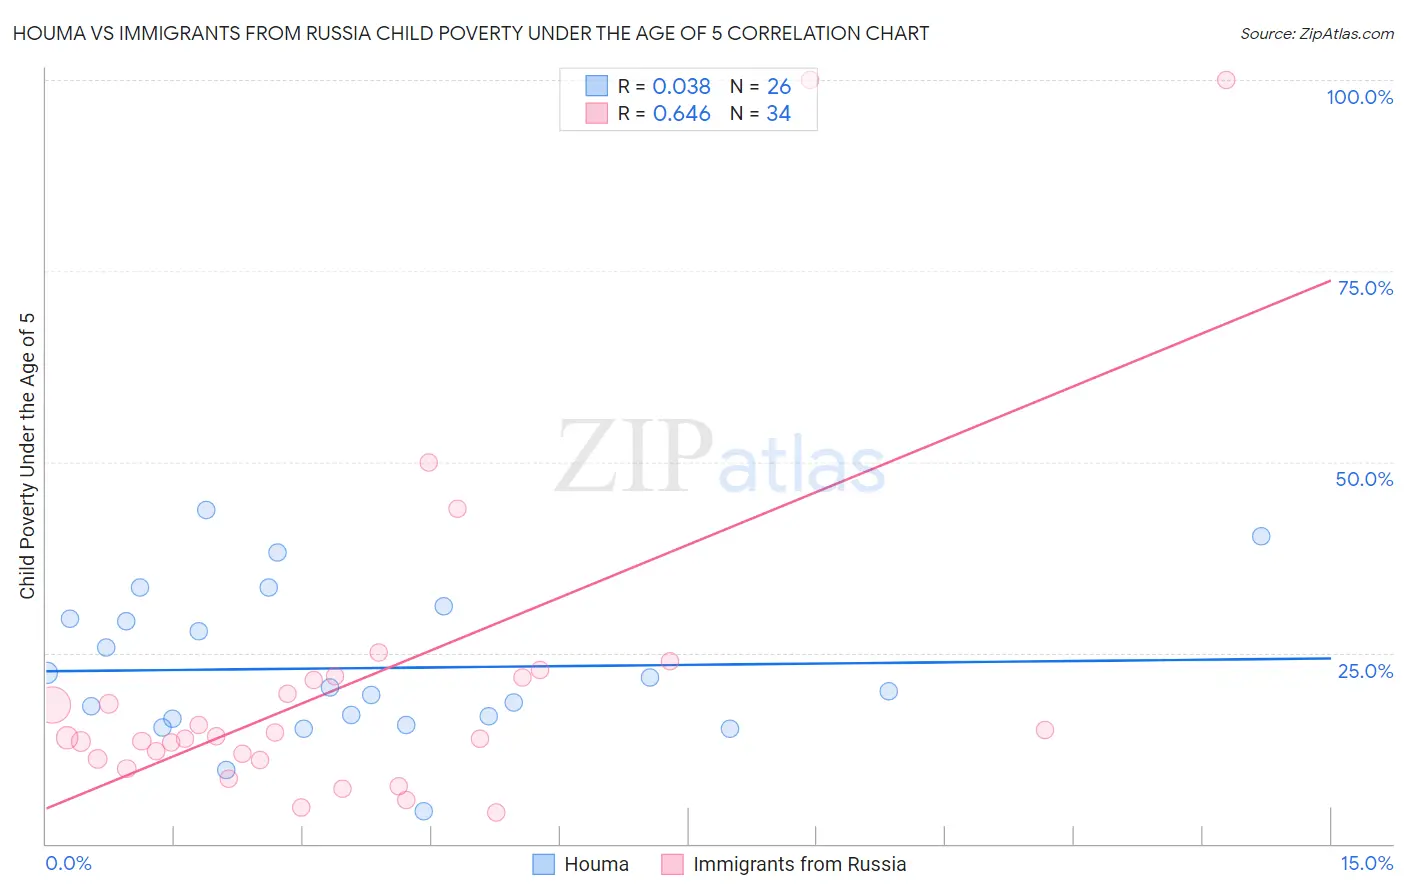 Houma vs Immigrants from Russia Child Poverty Under the Age of 5